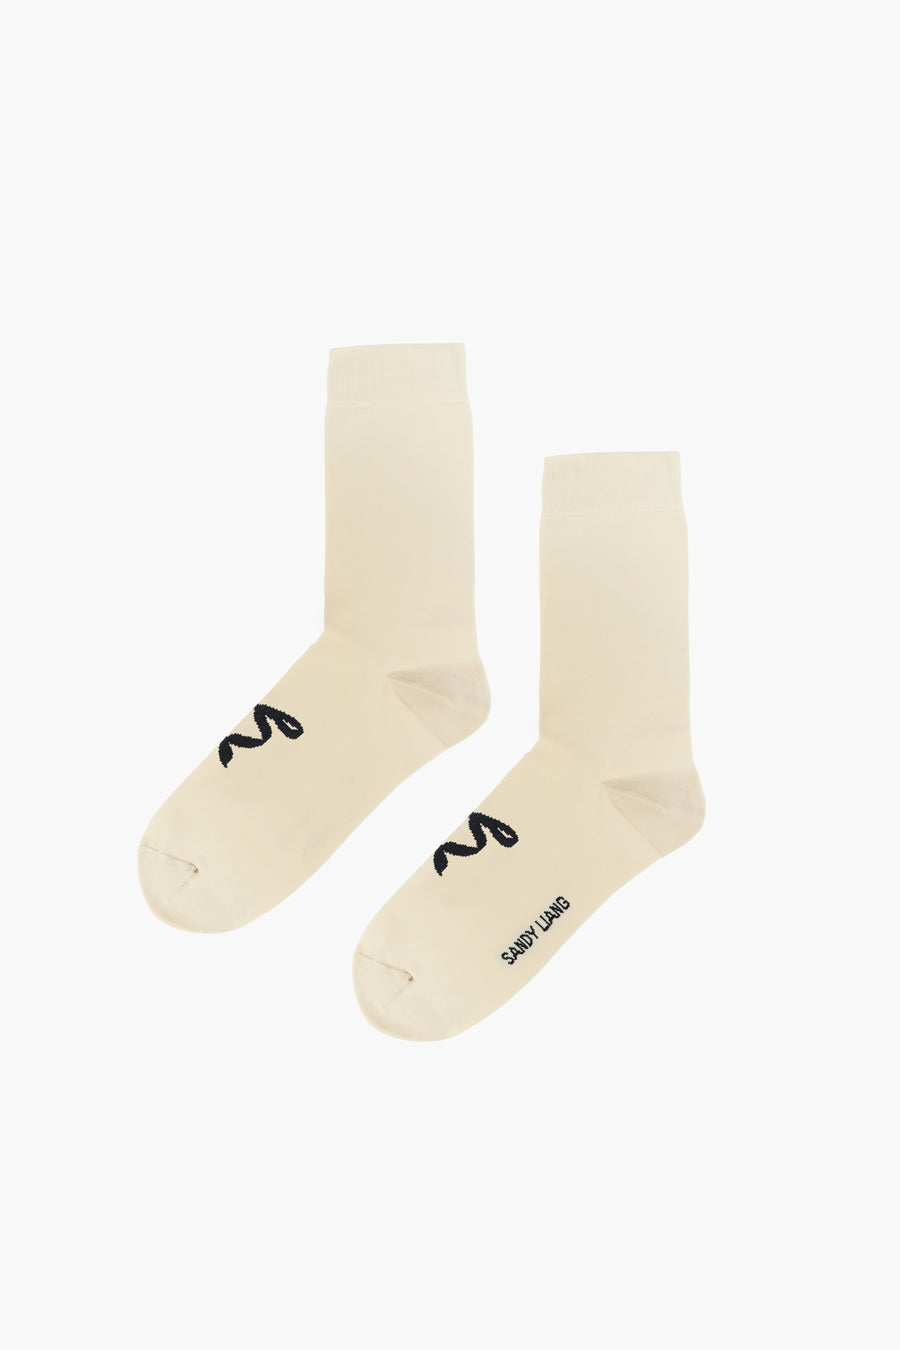 Butter yellow crew length socks with black bows on feet